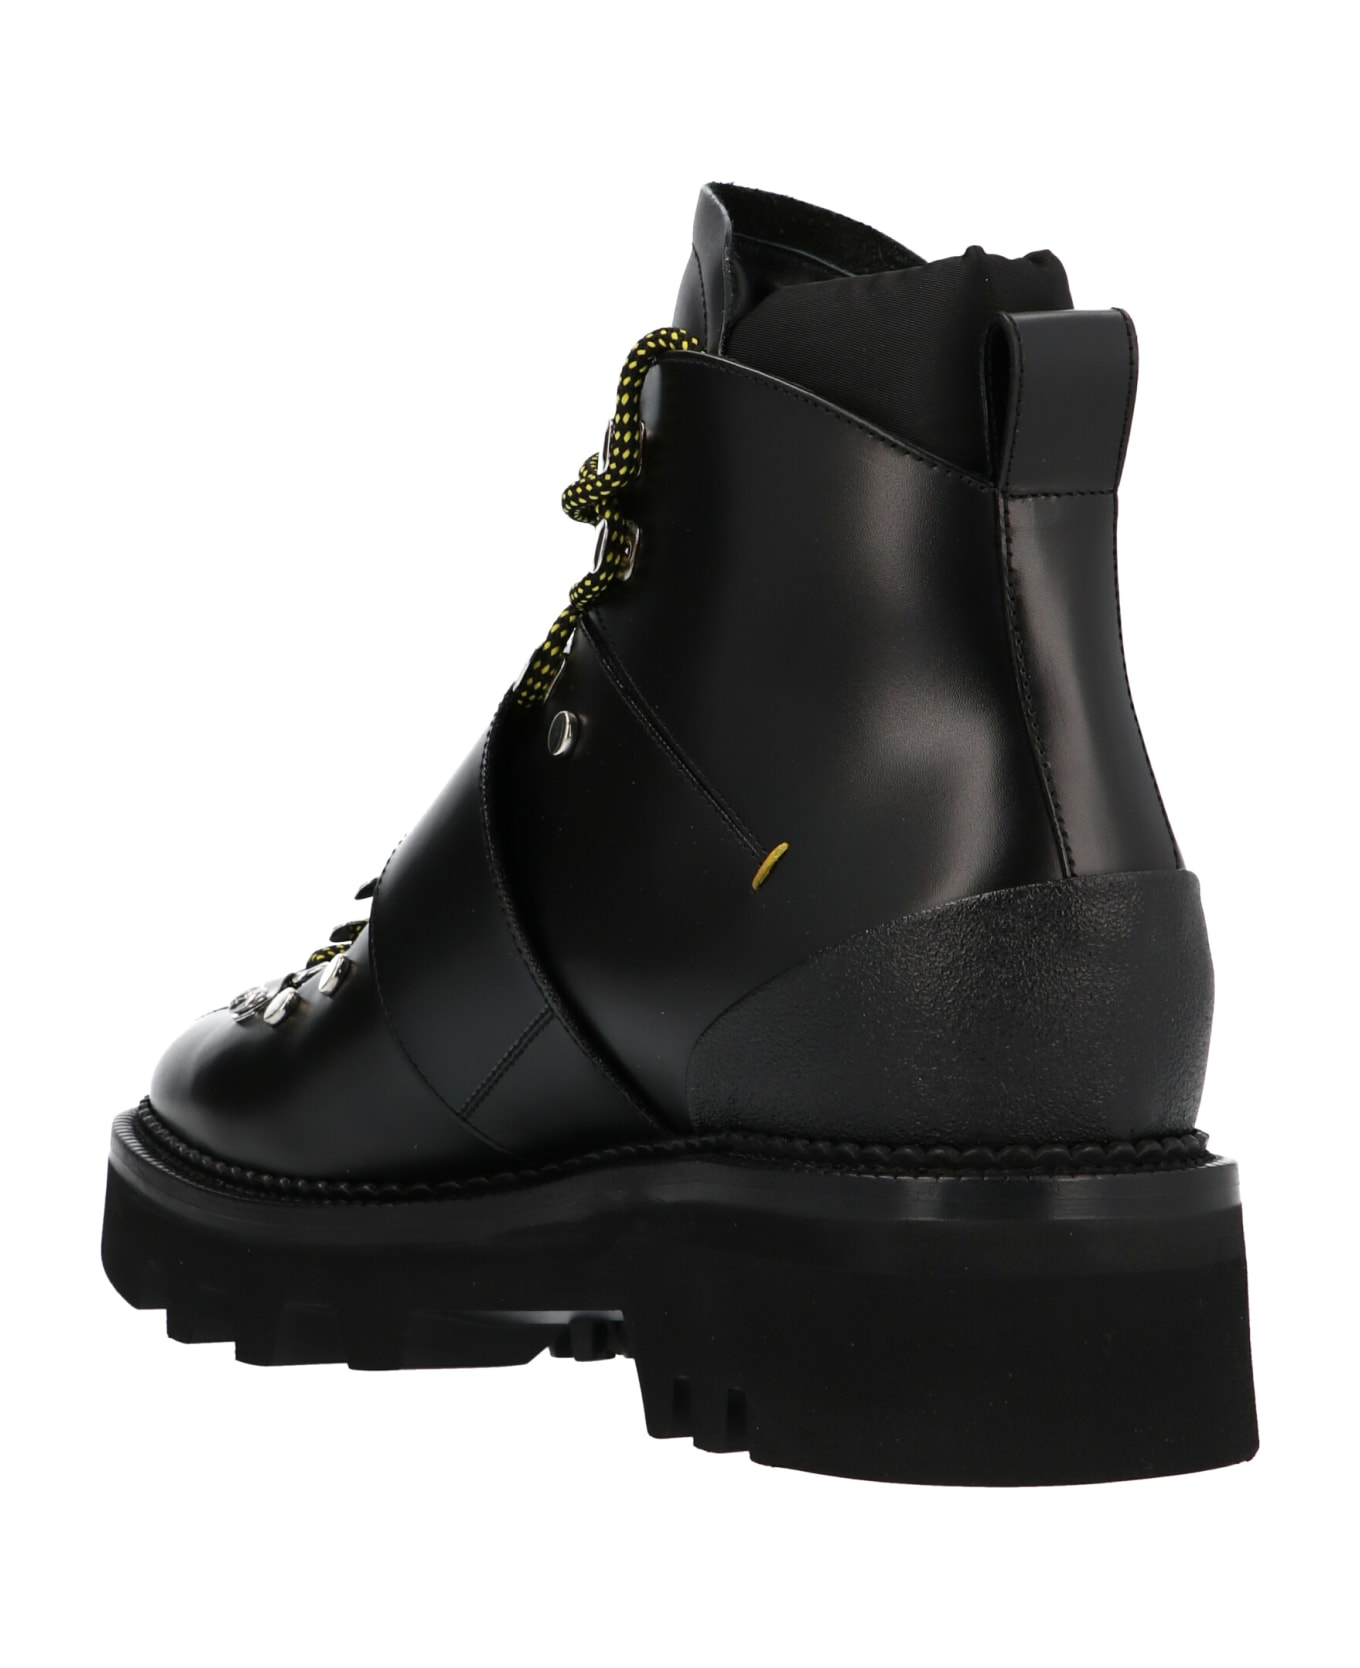 Dsquared2 'hector' Shoes | italist